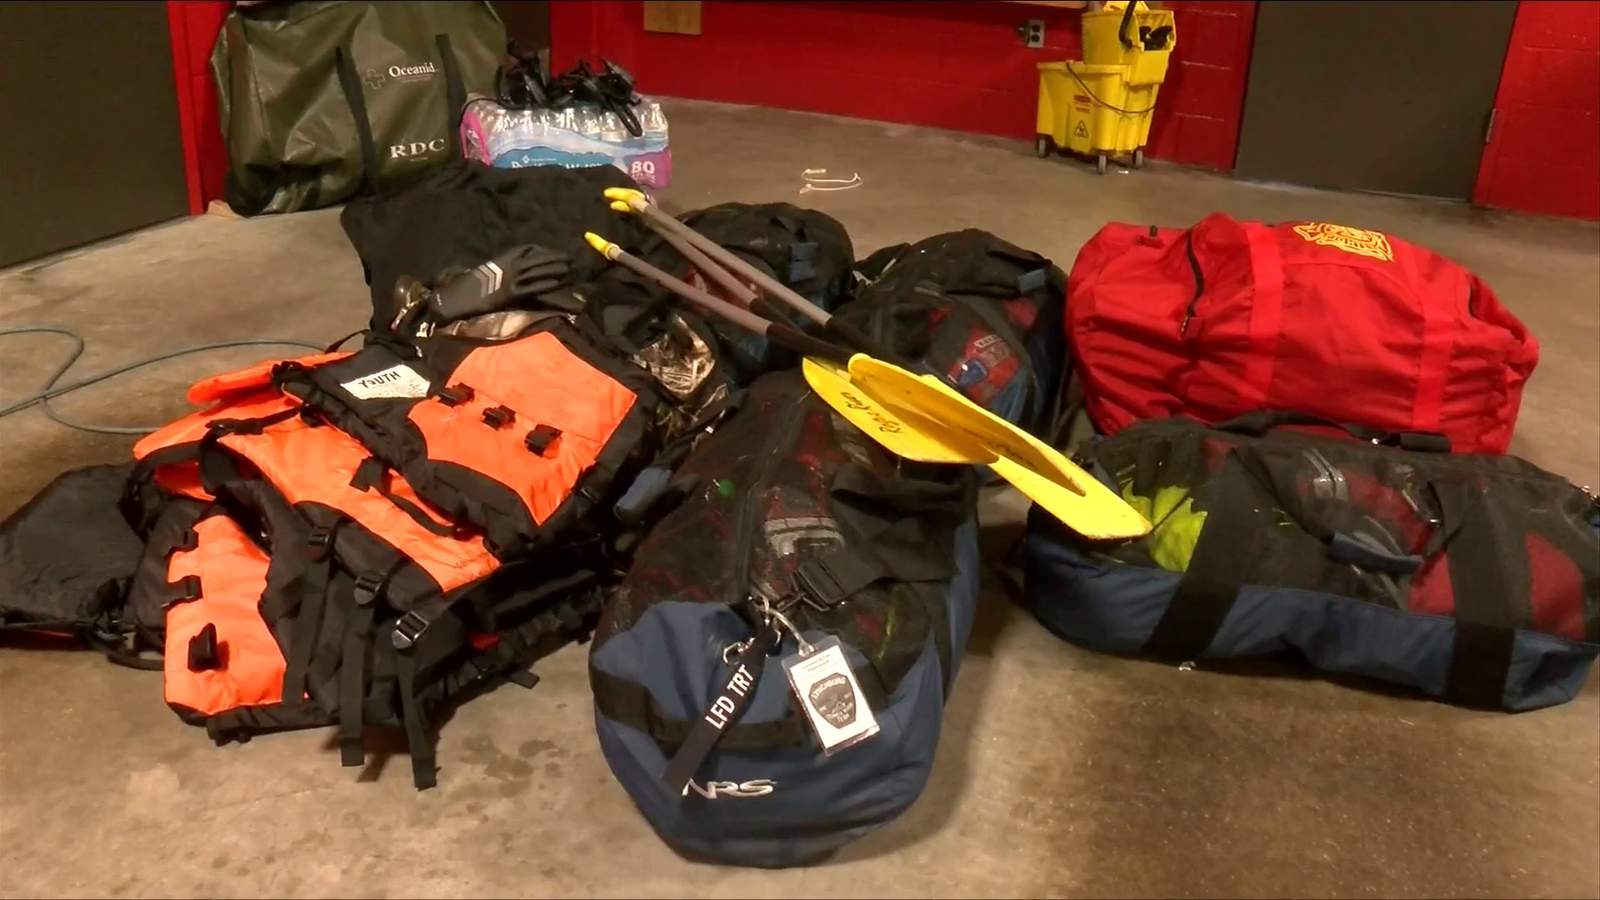 Central Virginia water rescue crews, city leaders prepared for flooding days in advance - WSLS 10